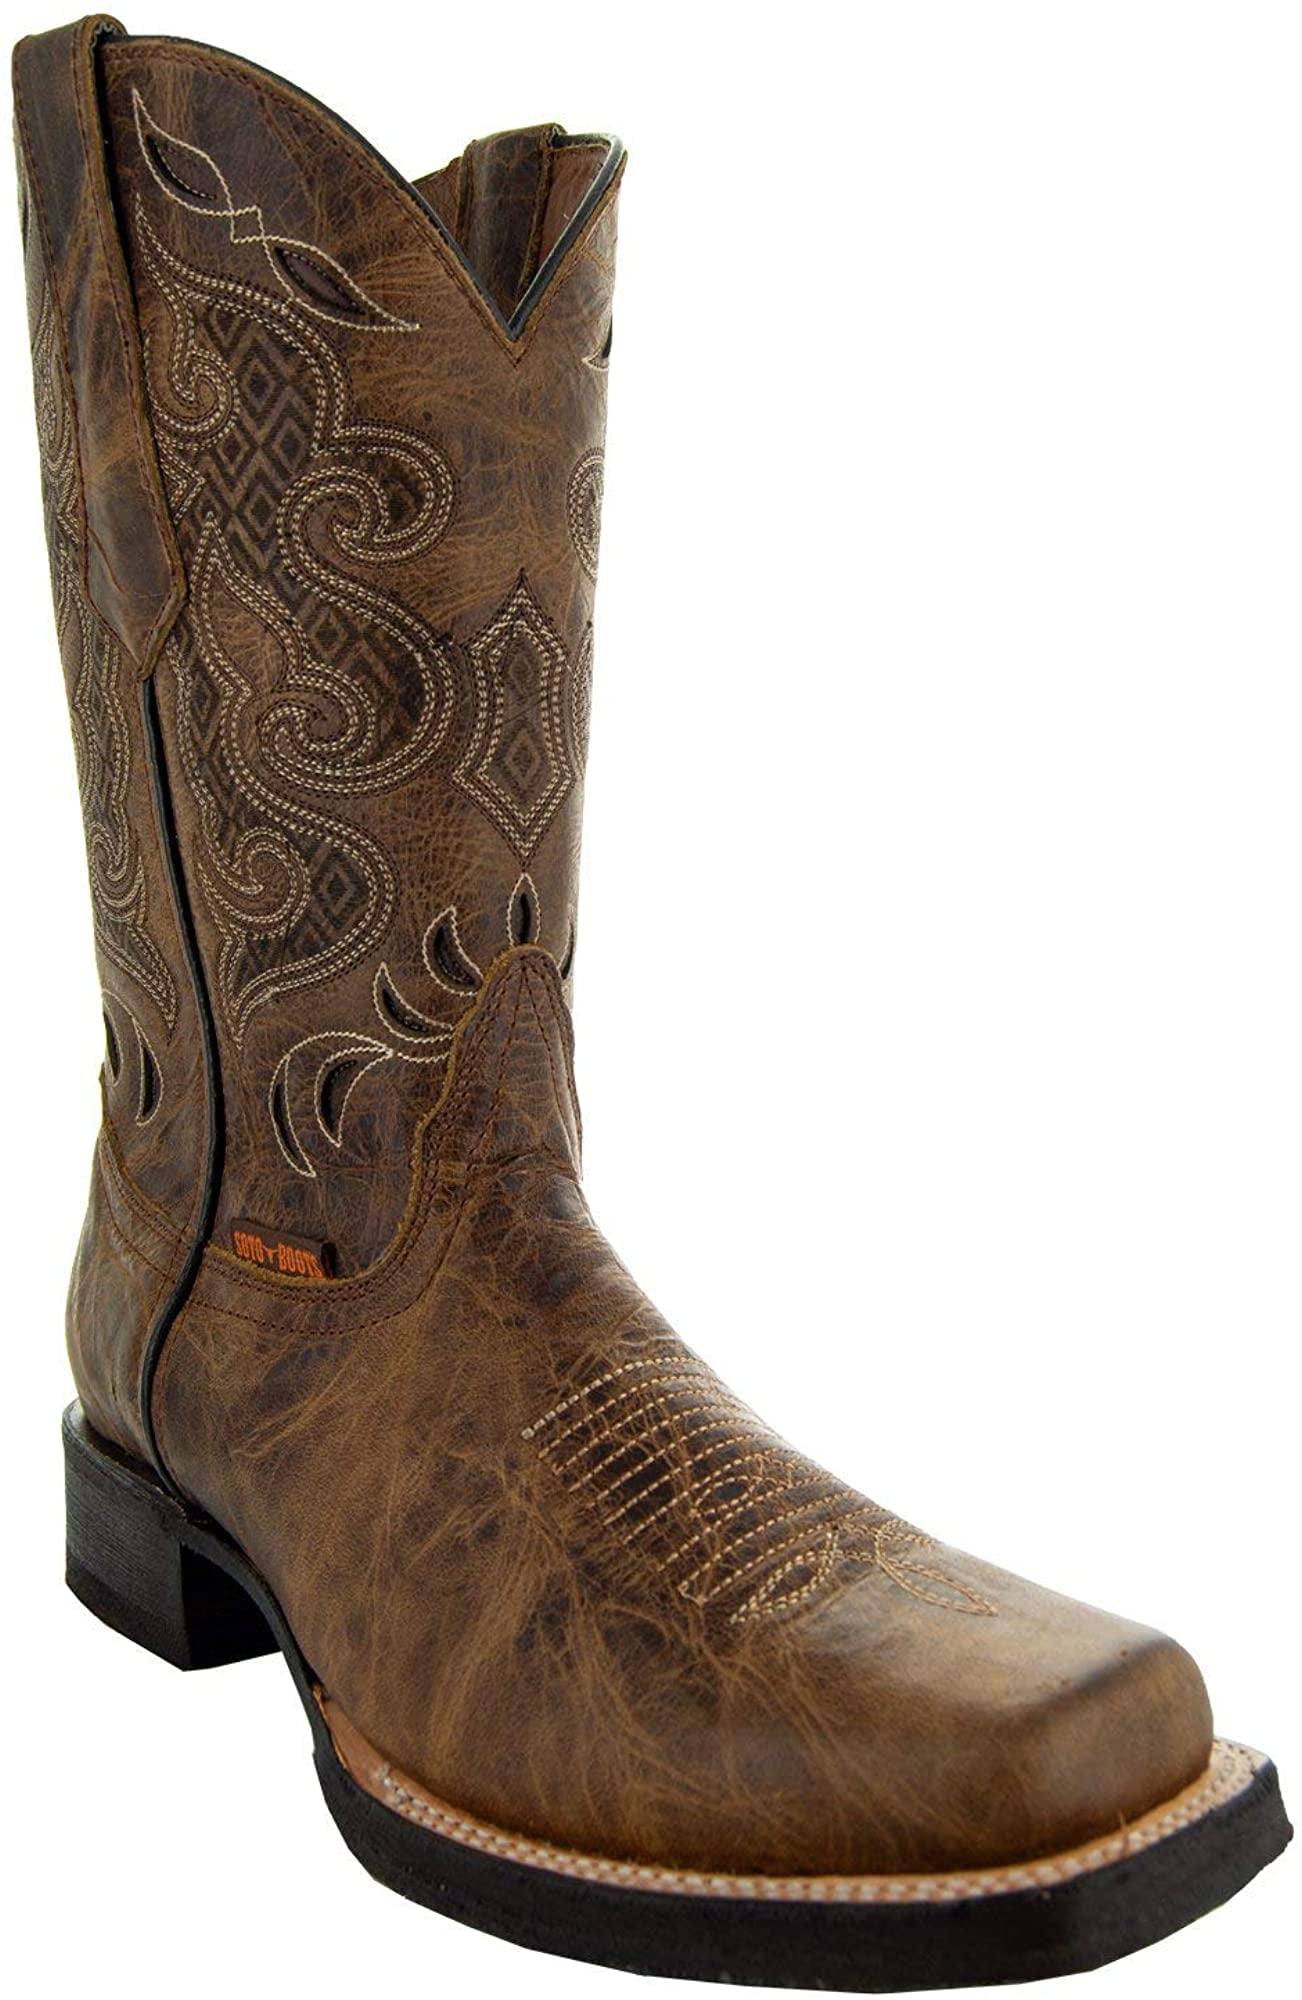 Soto Boots Mens Broad Square Toe Boots H50019 